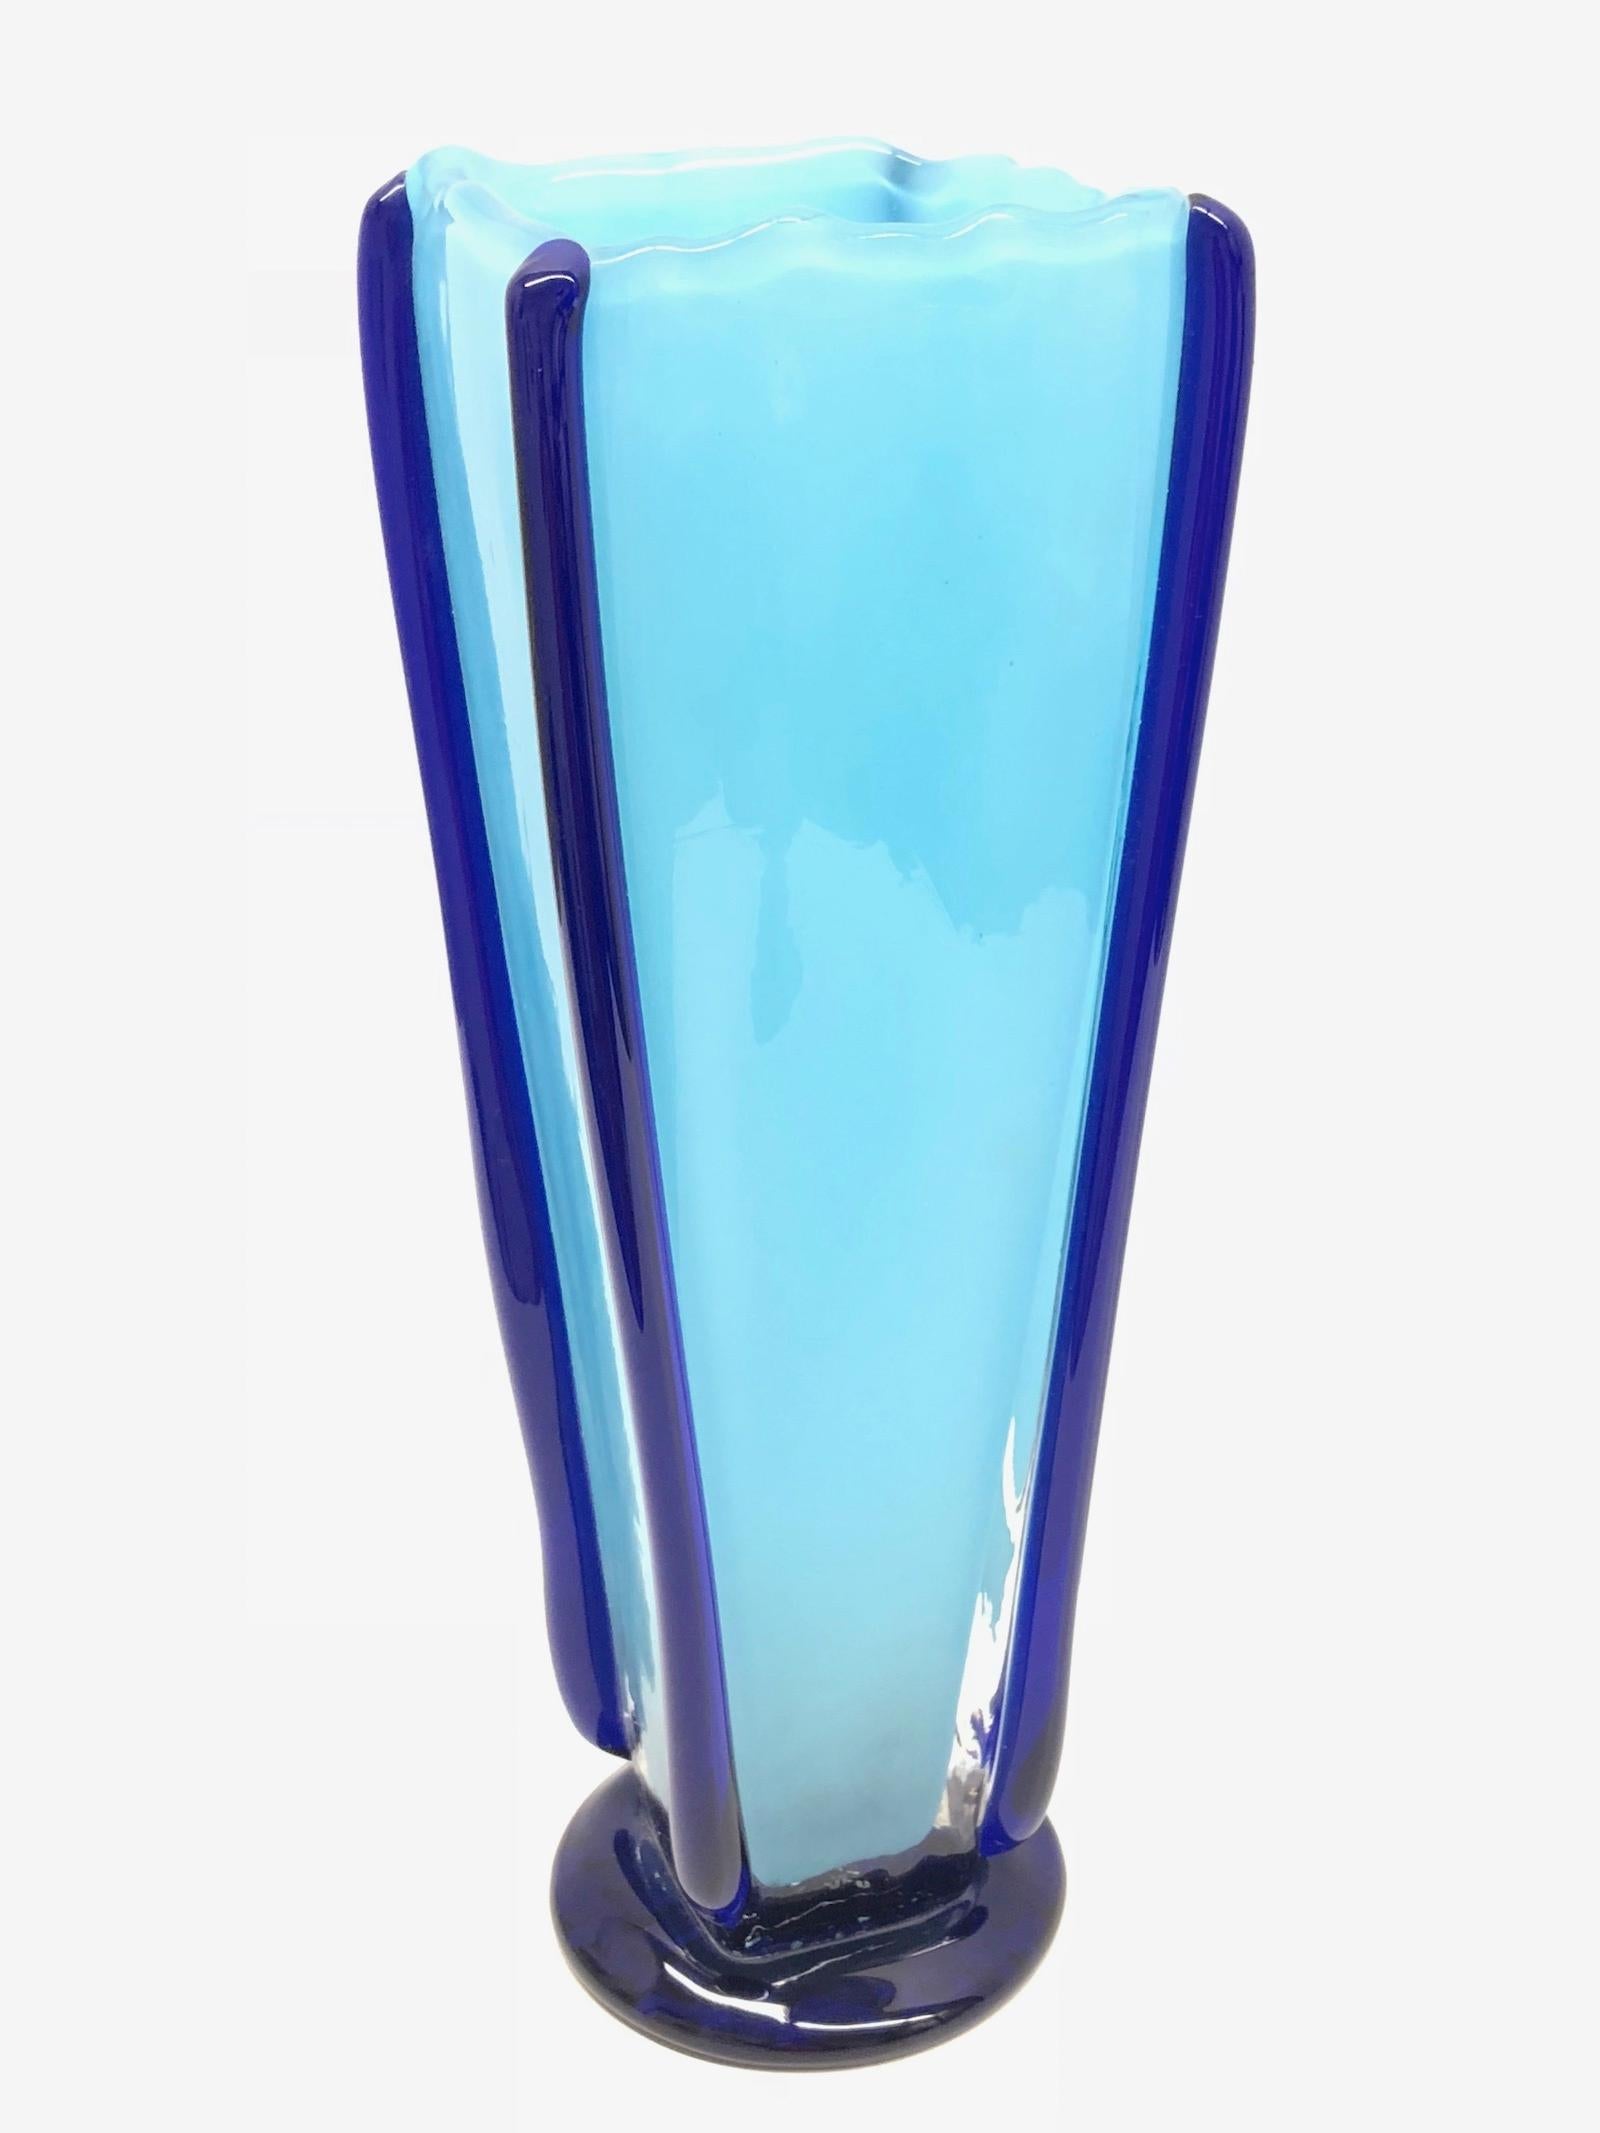 A gorgeous Bohemian glass vase by Jiri Suhajek Design. Made in two different shades of blue. Signed at the base. With minor signs of wear as expected with age and use. Made in the 1970s-1980s.